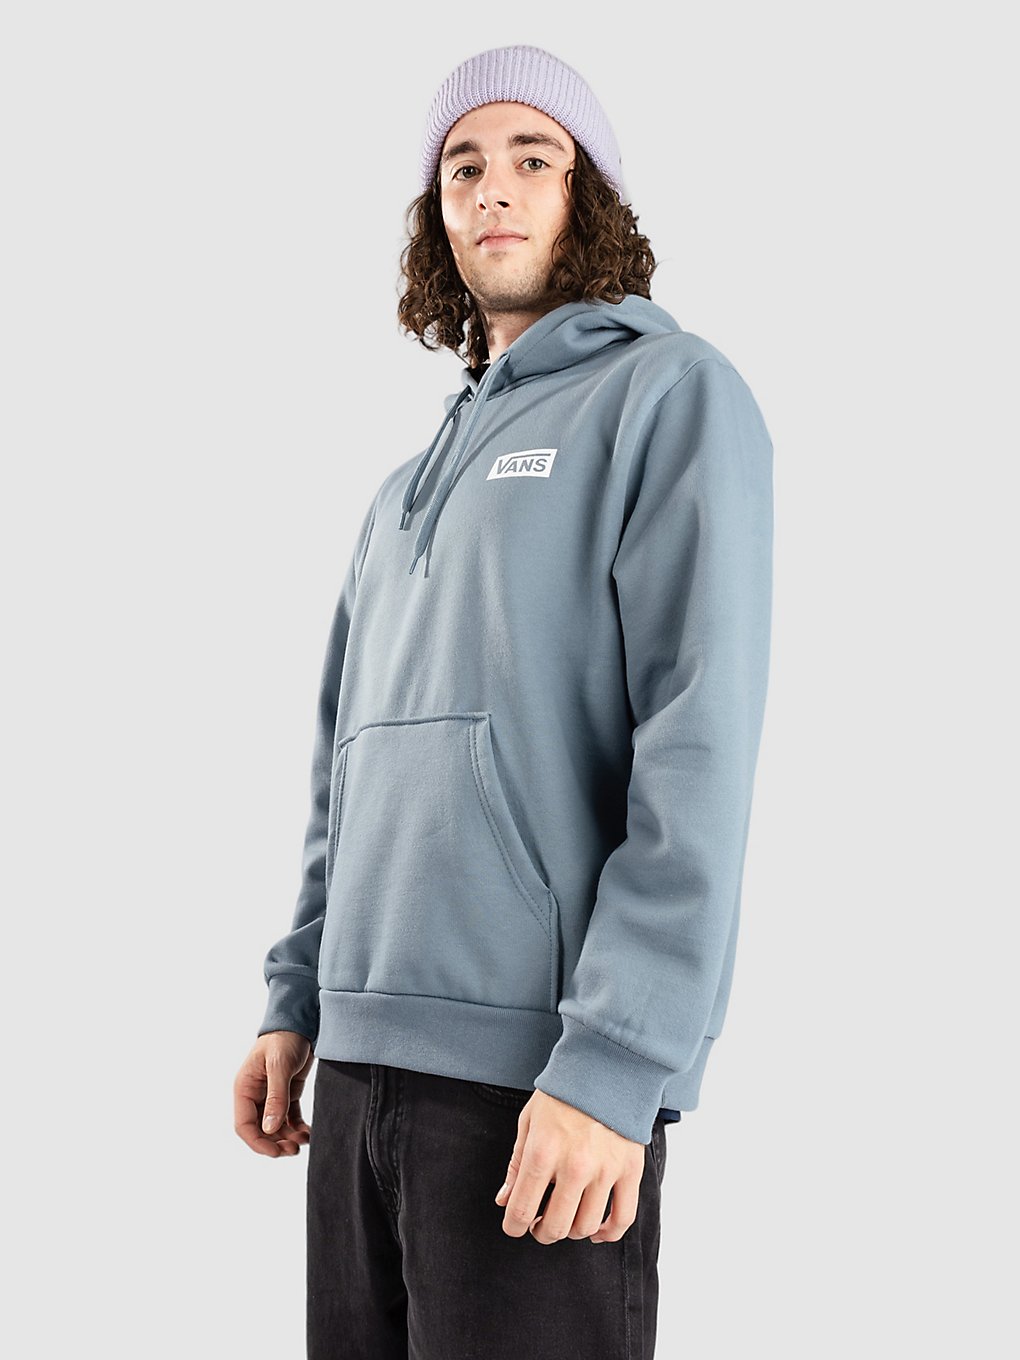 Vans Relaxed Fit Po Hoodie blue mirage kaufen